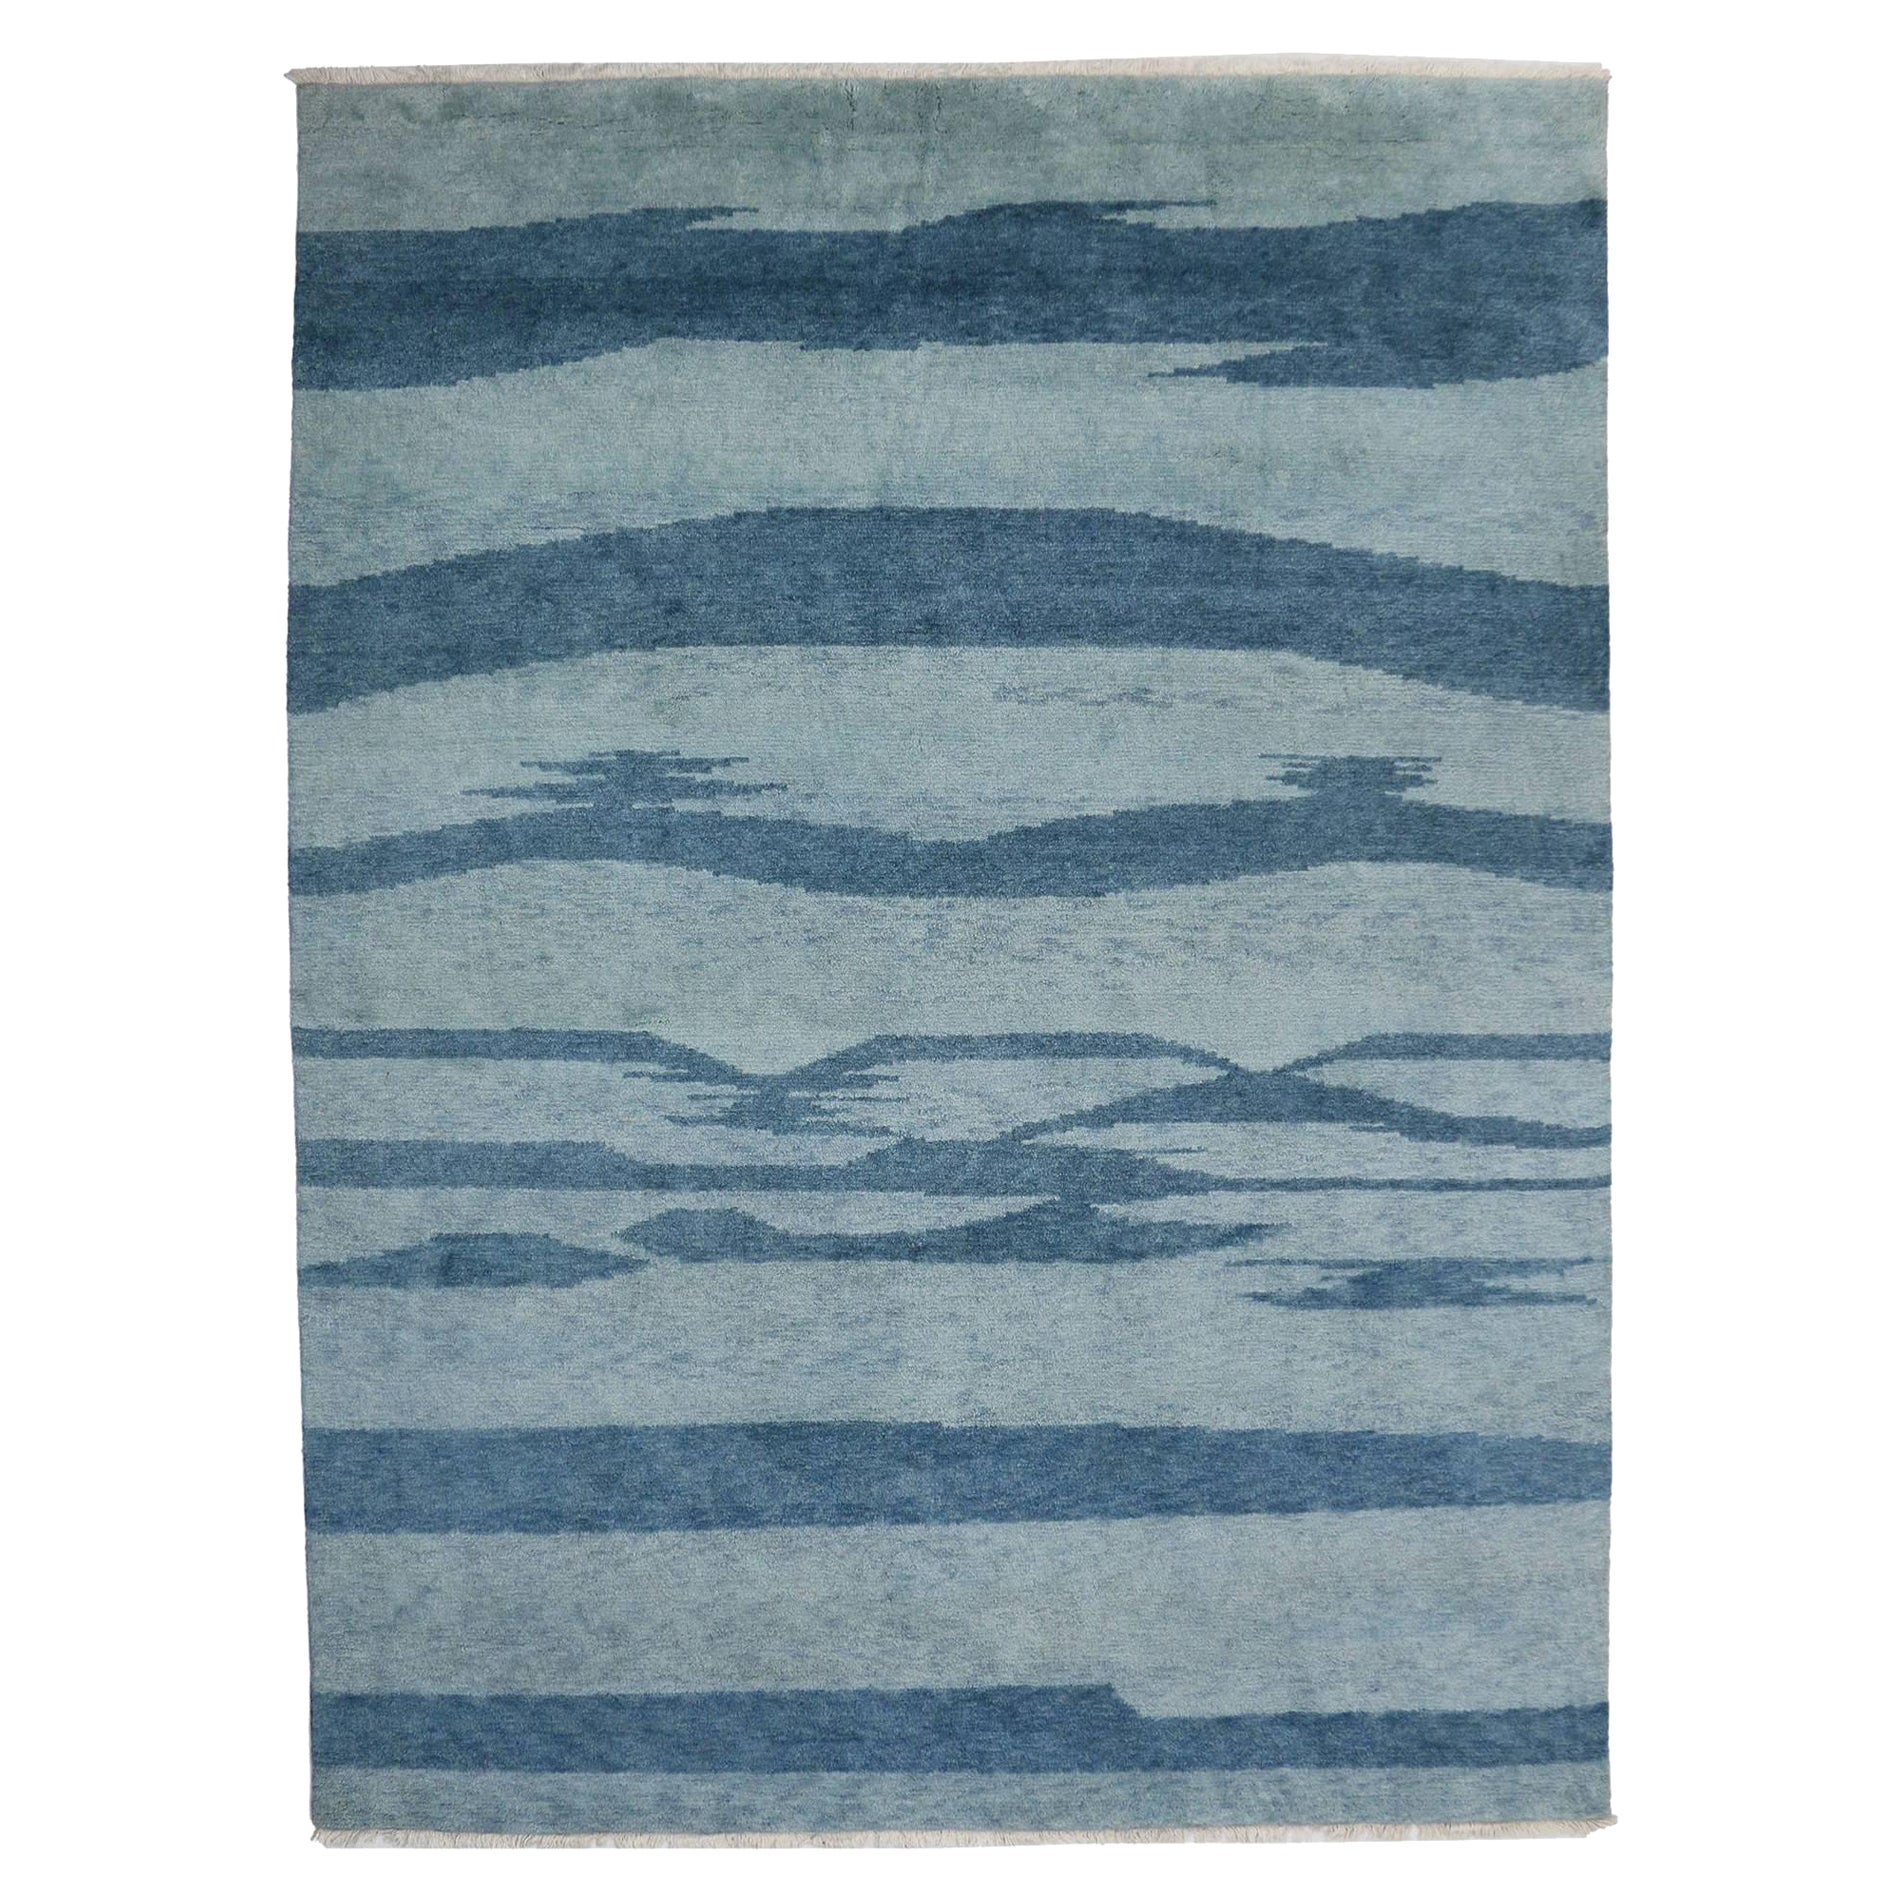 New Contemporary Moroccan Area Rug with Modern Coastal Beach Style